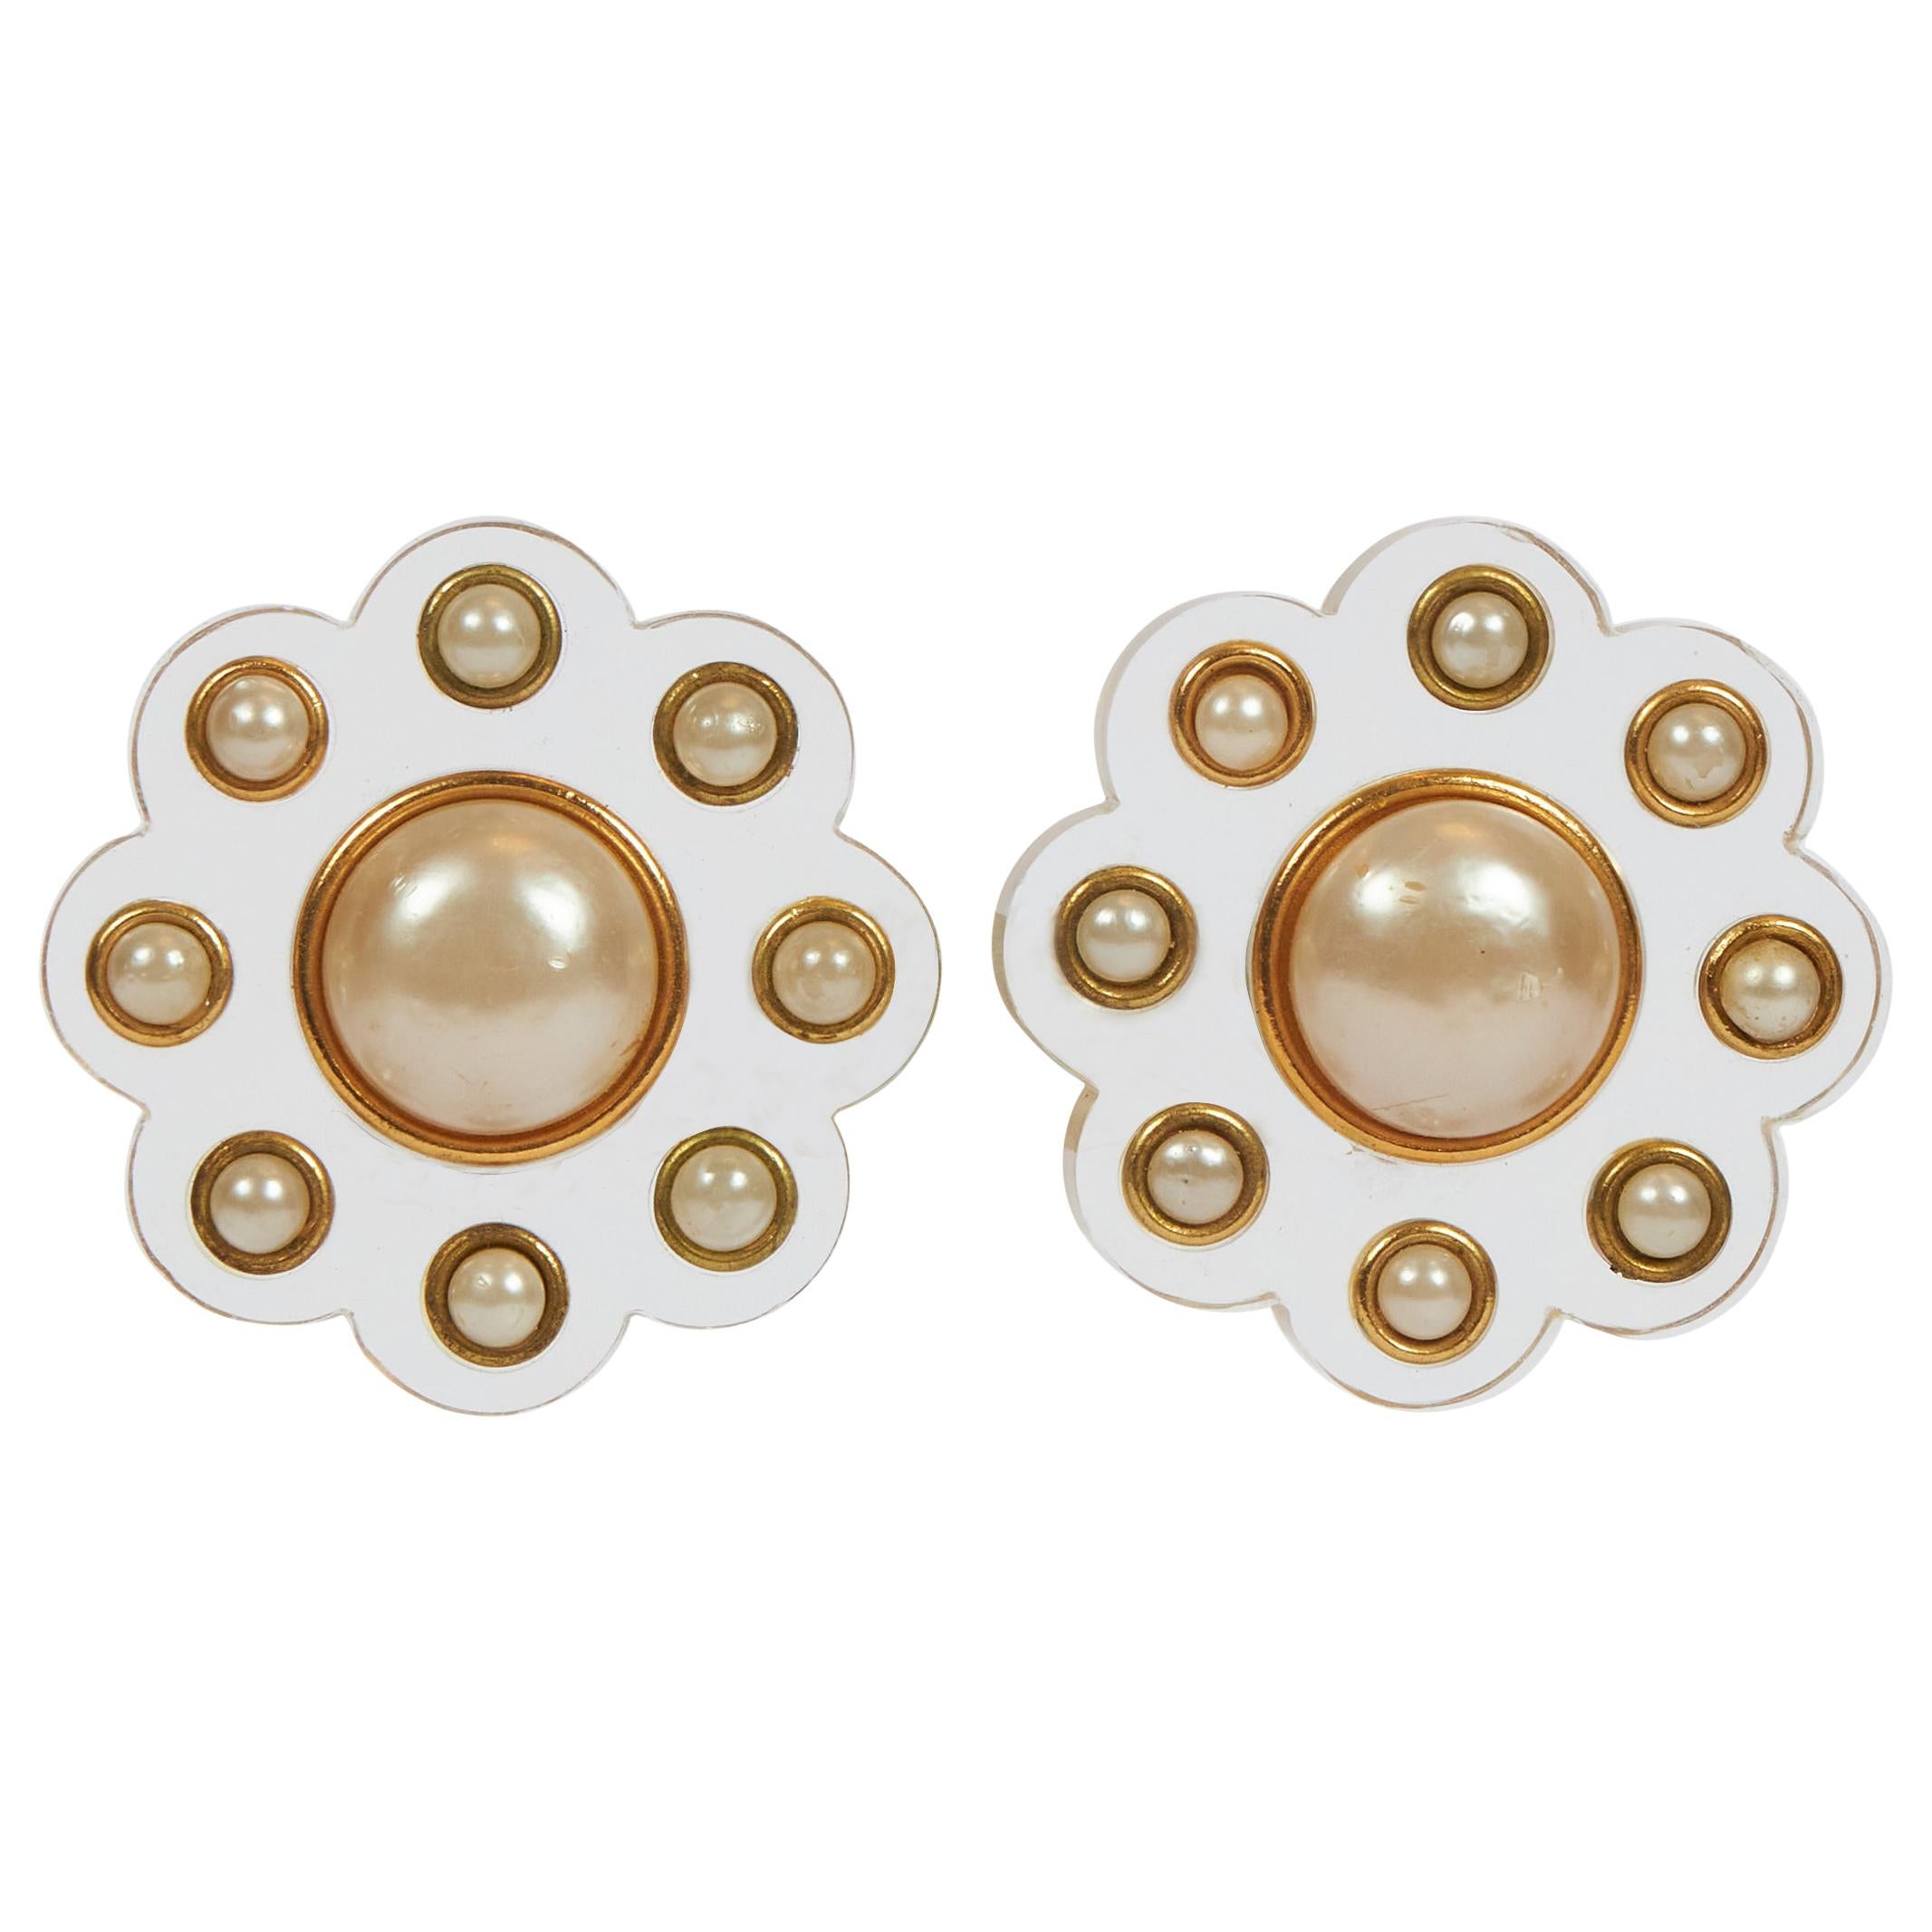 1980's Vintage Chanel Rare Lucite Pearl Flower Earrings For Sale